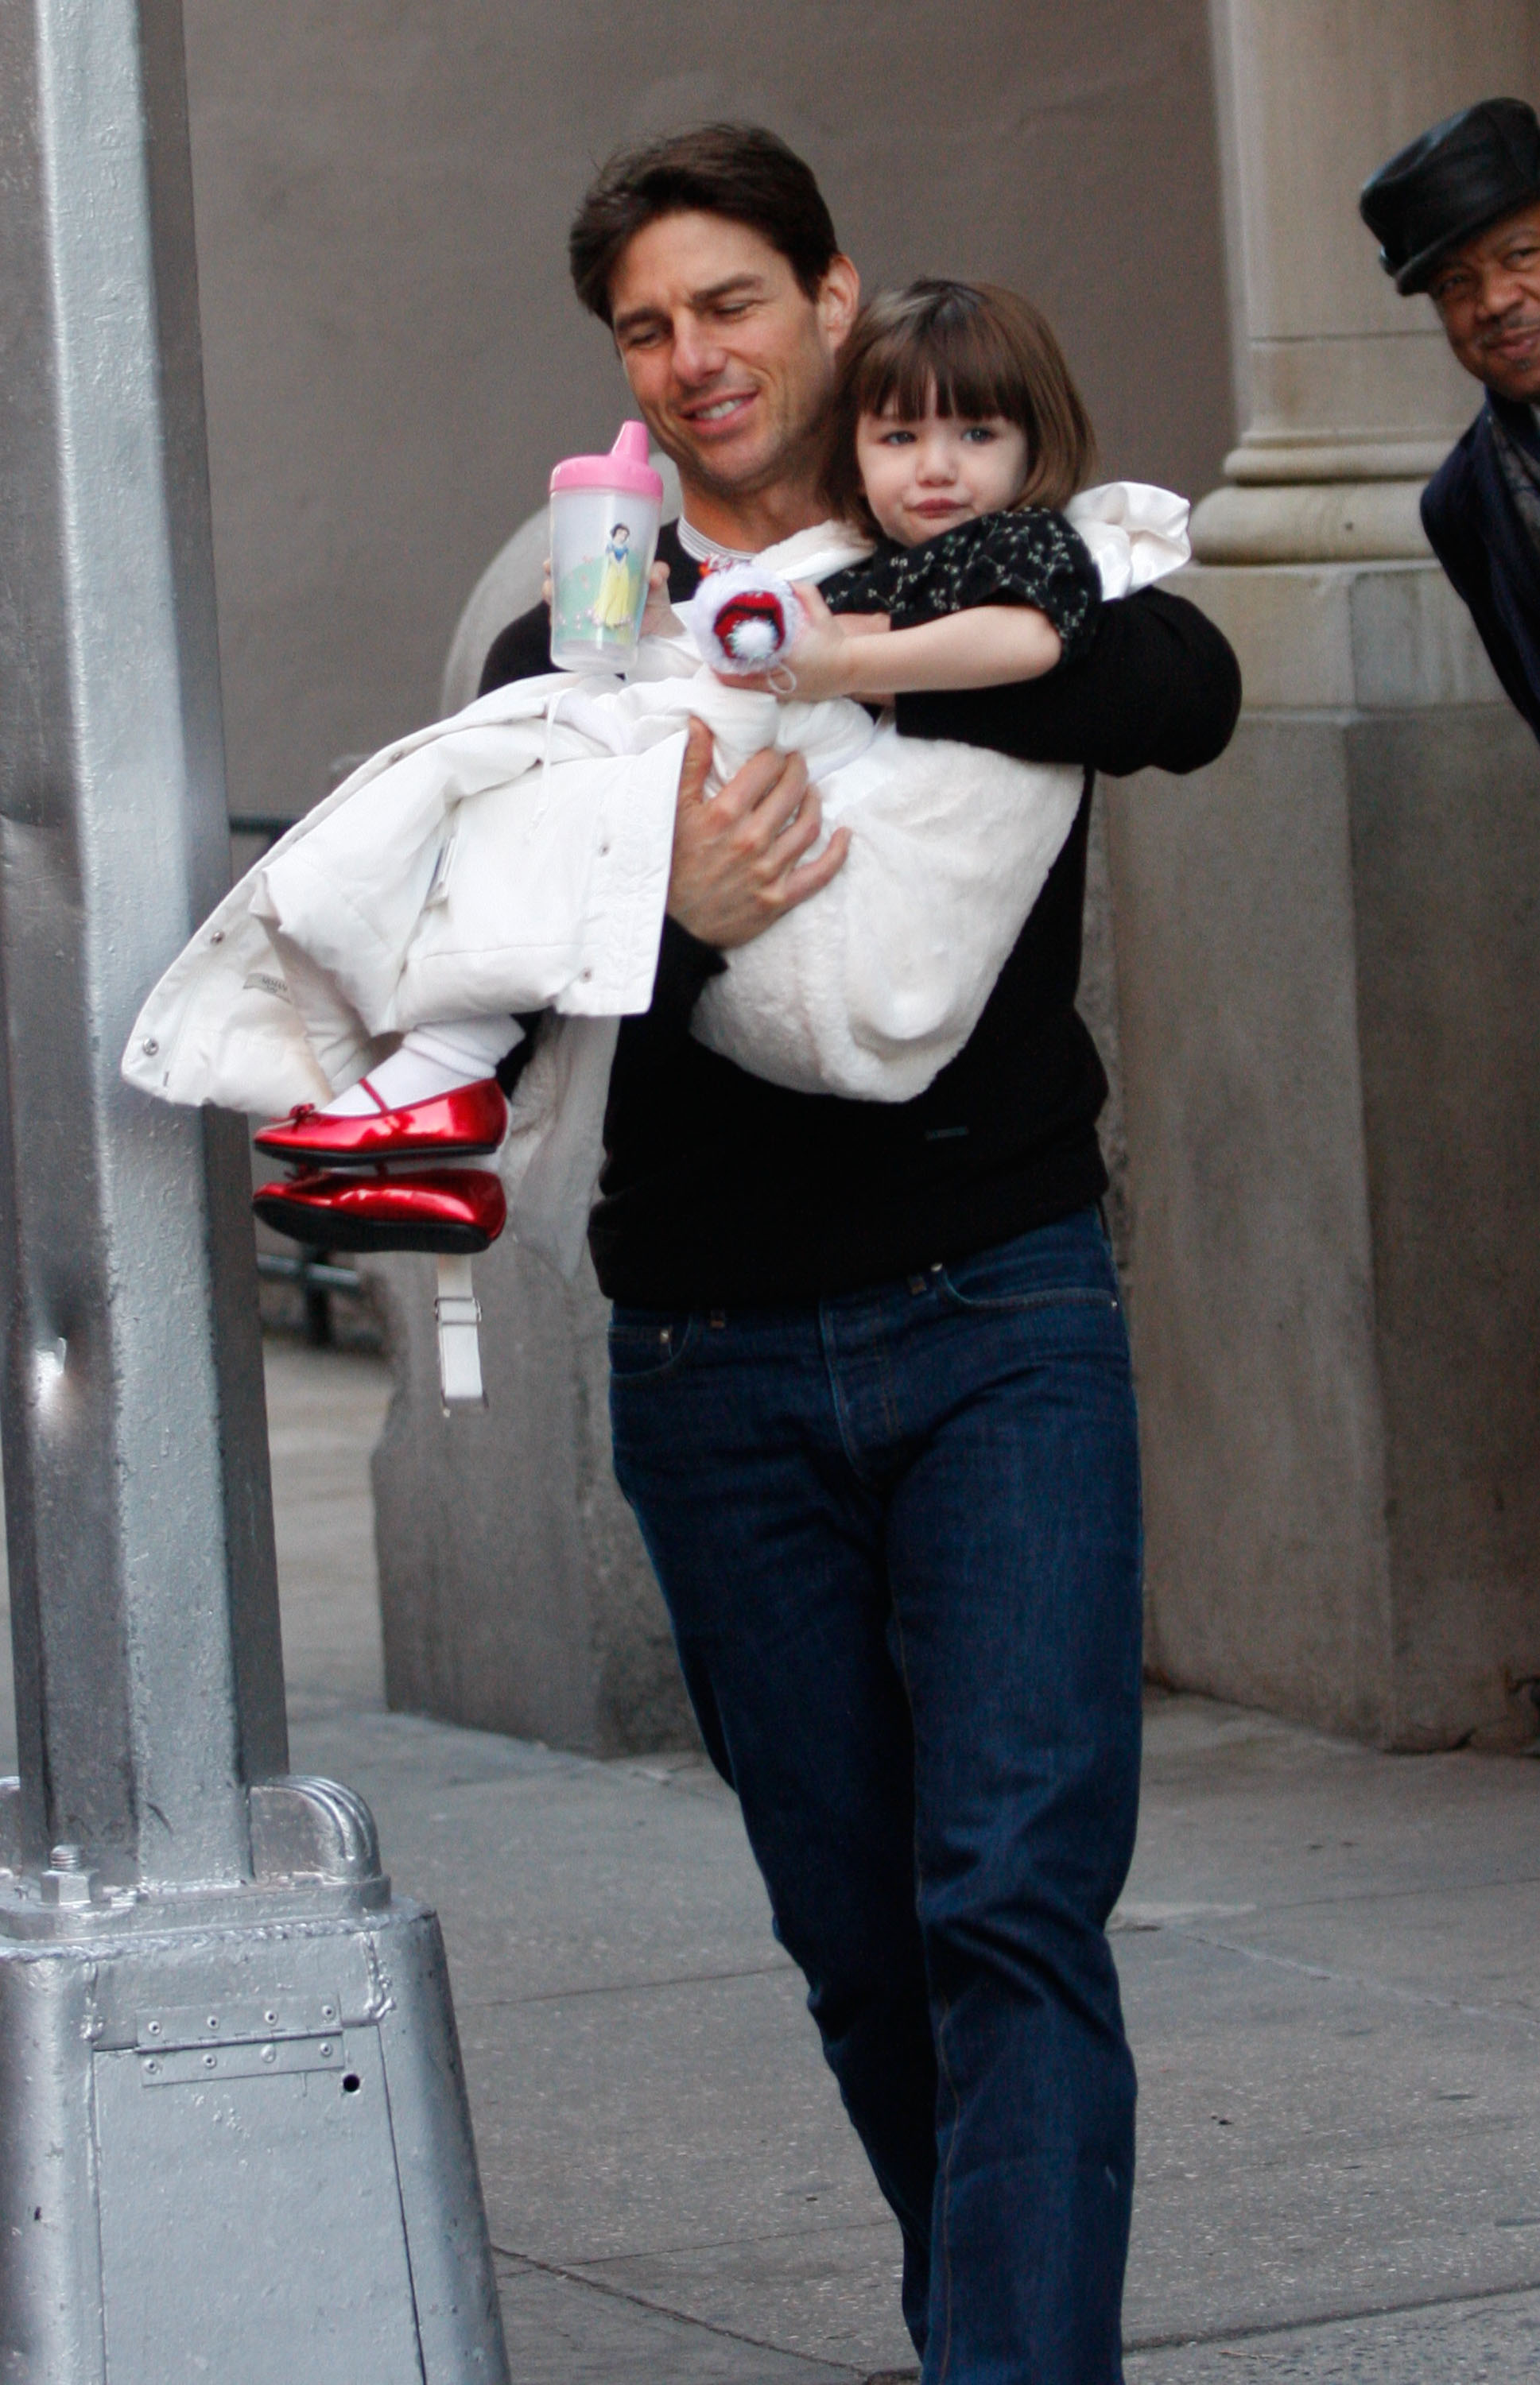 Tom Cruise and Suri Cruise are seen on the streets of Manhattan in New York City on December 3, 2008 | Source: Getty Images